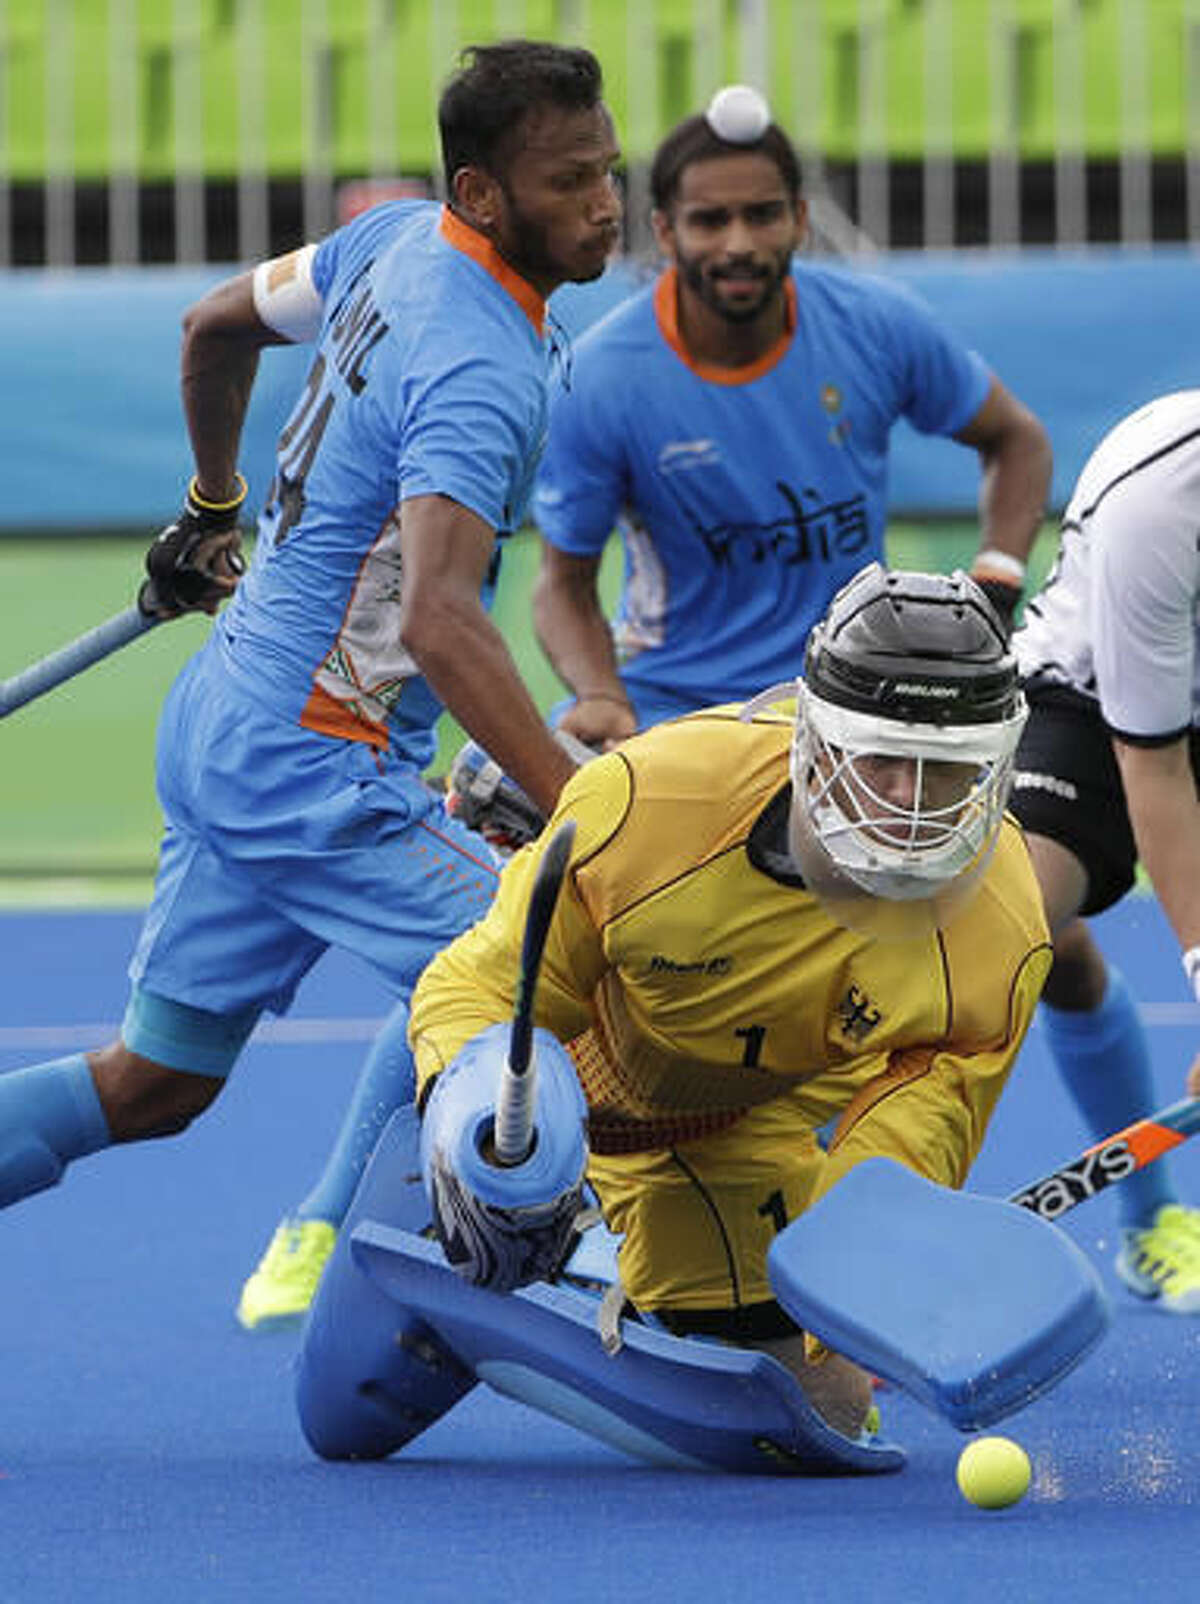 Germany's goalkeeper Nicolas Jacobi, foreground, saves the ball against India's Sunil Sowmarpet, center background, during a men's field hockey match at 2016 Summer Olympics in Rio de Janeiro, Brazil, Monday, Aug. 8, 2016. (AP Photo/Hussein Malla)